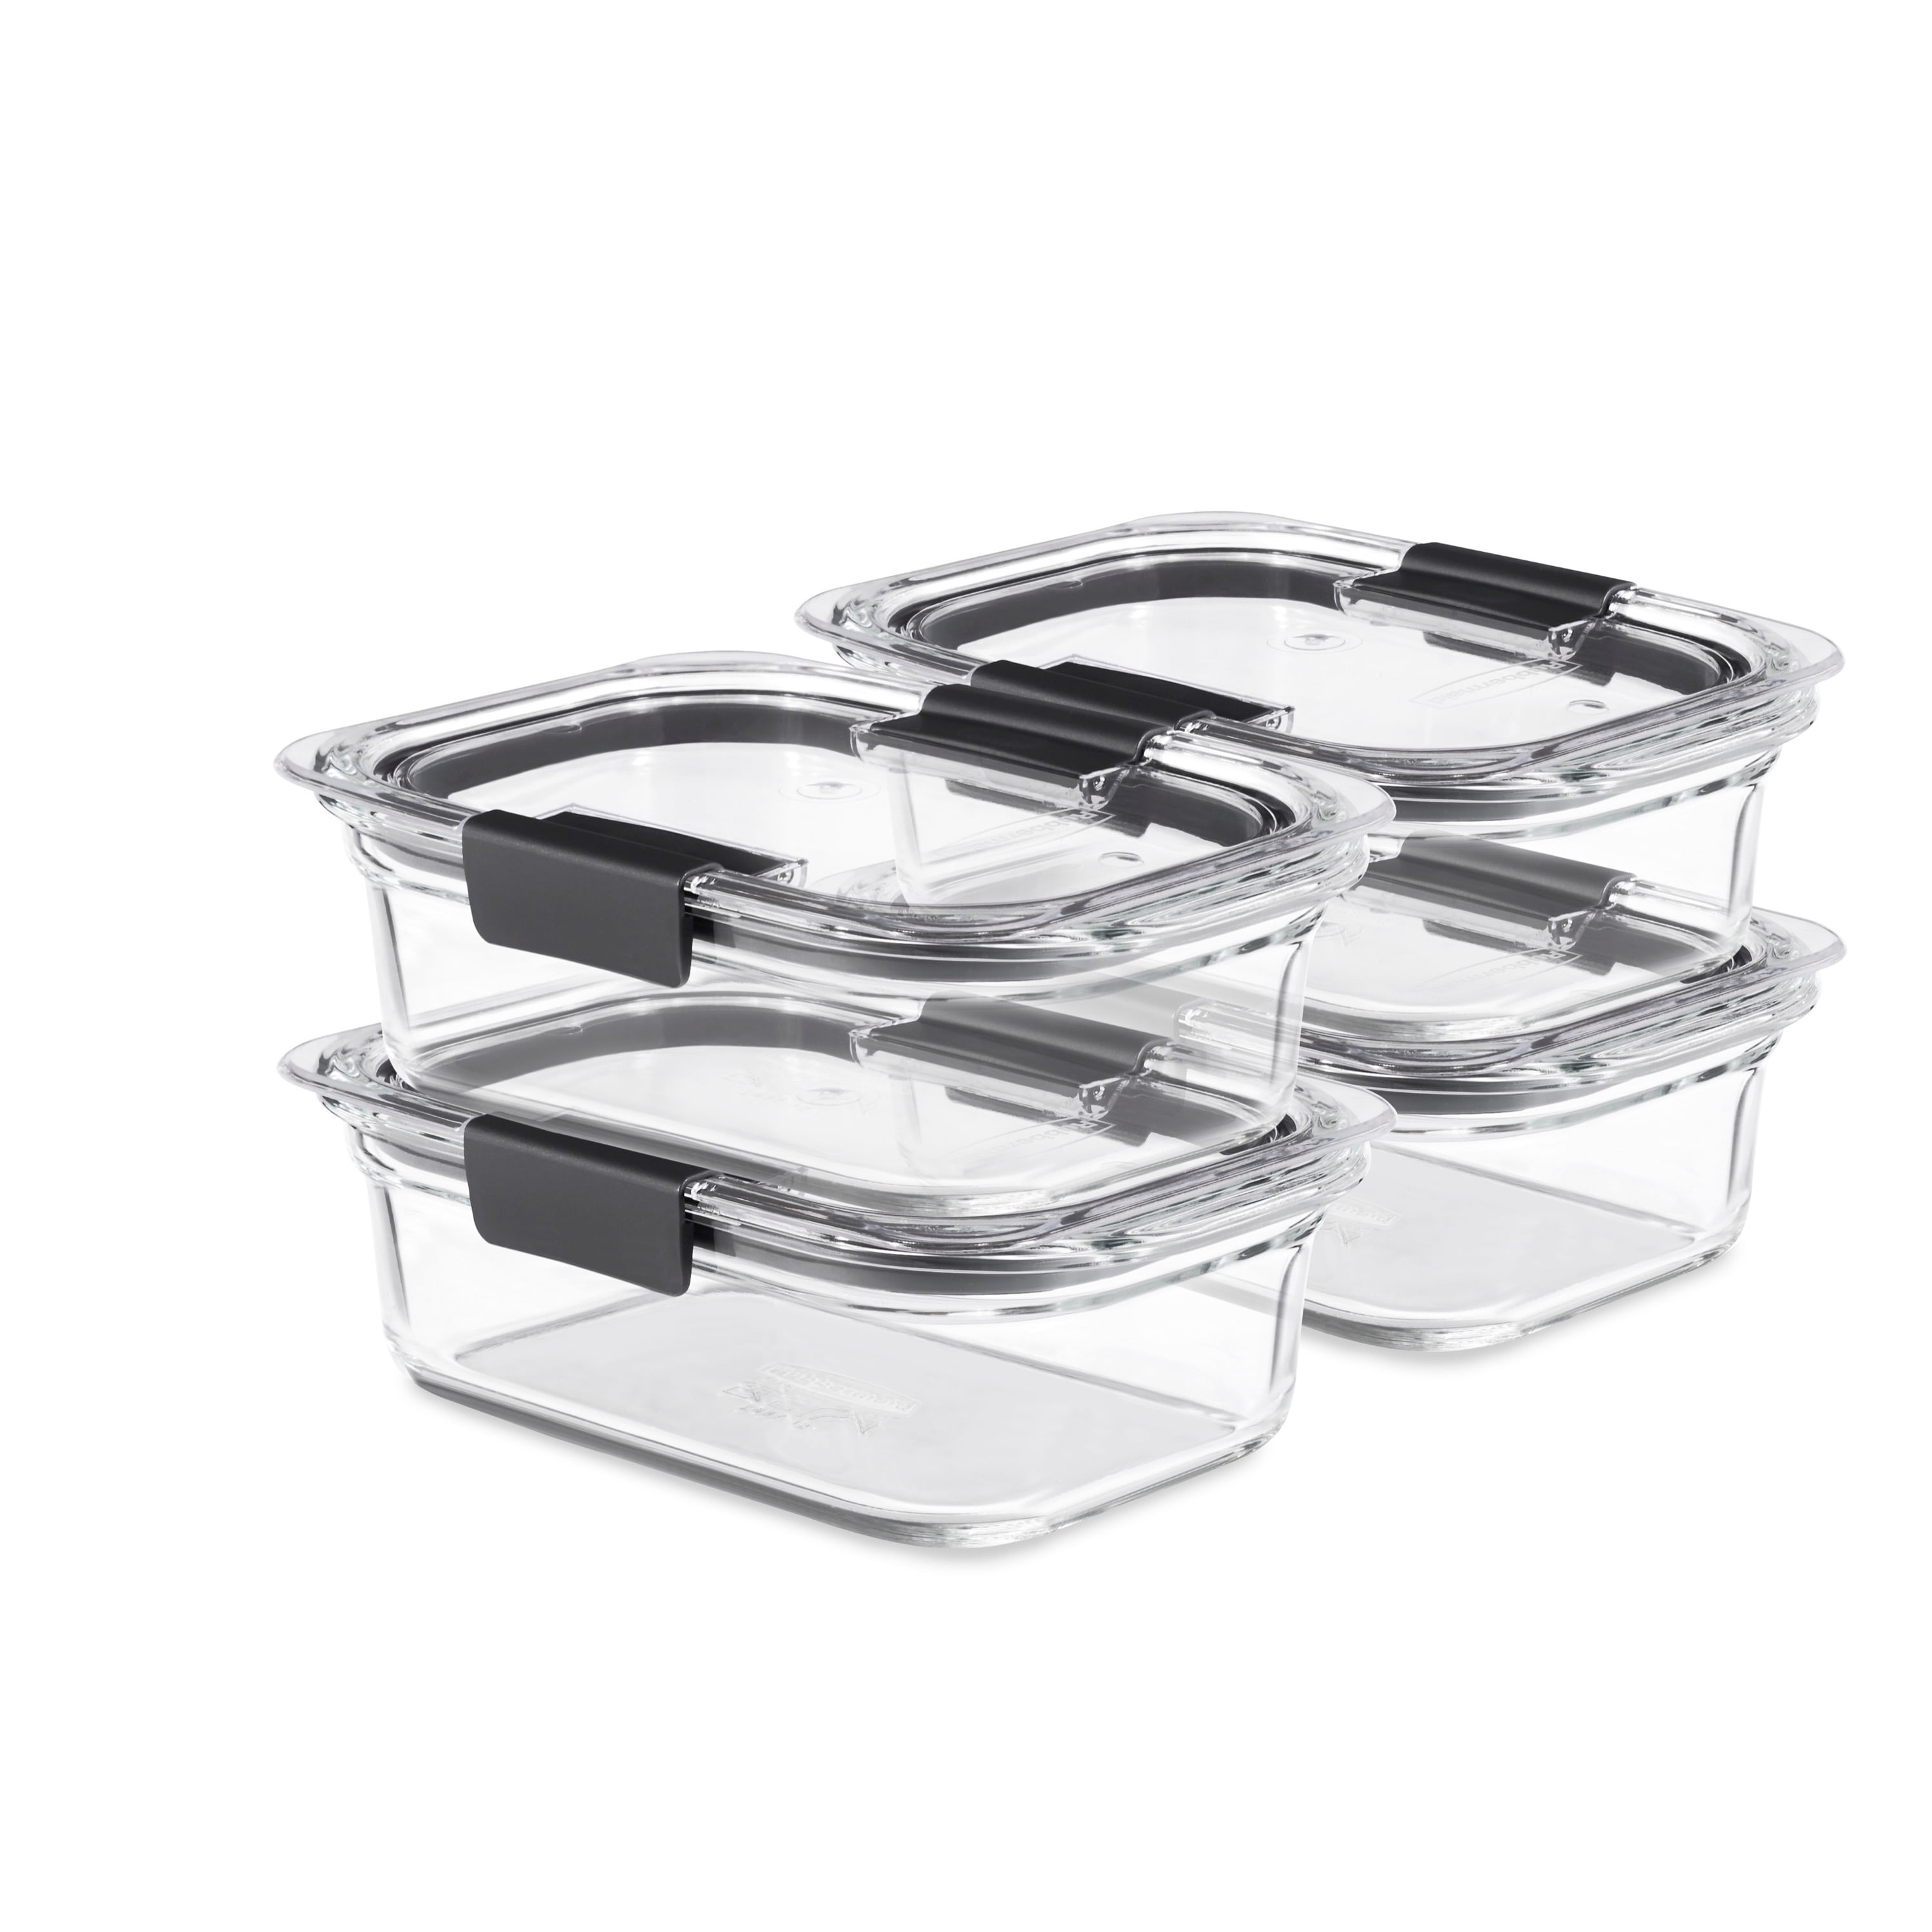 Set Rubbermaid Brilliance Leak-Proof Food Storage Containers with Airtight Lids 